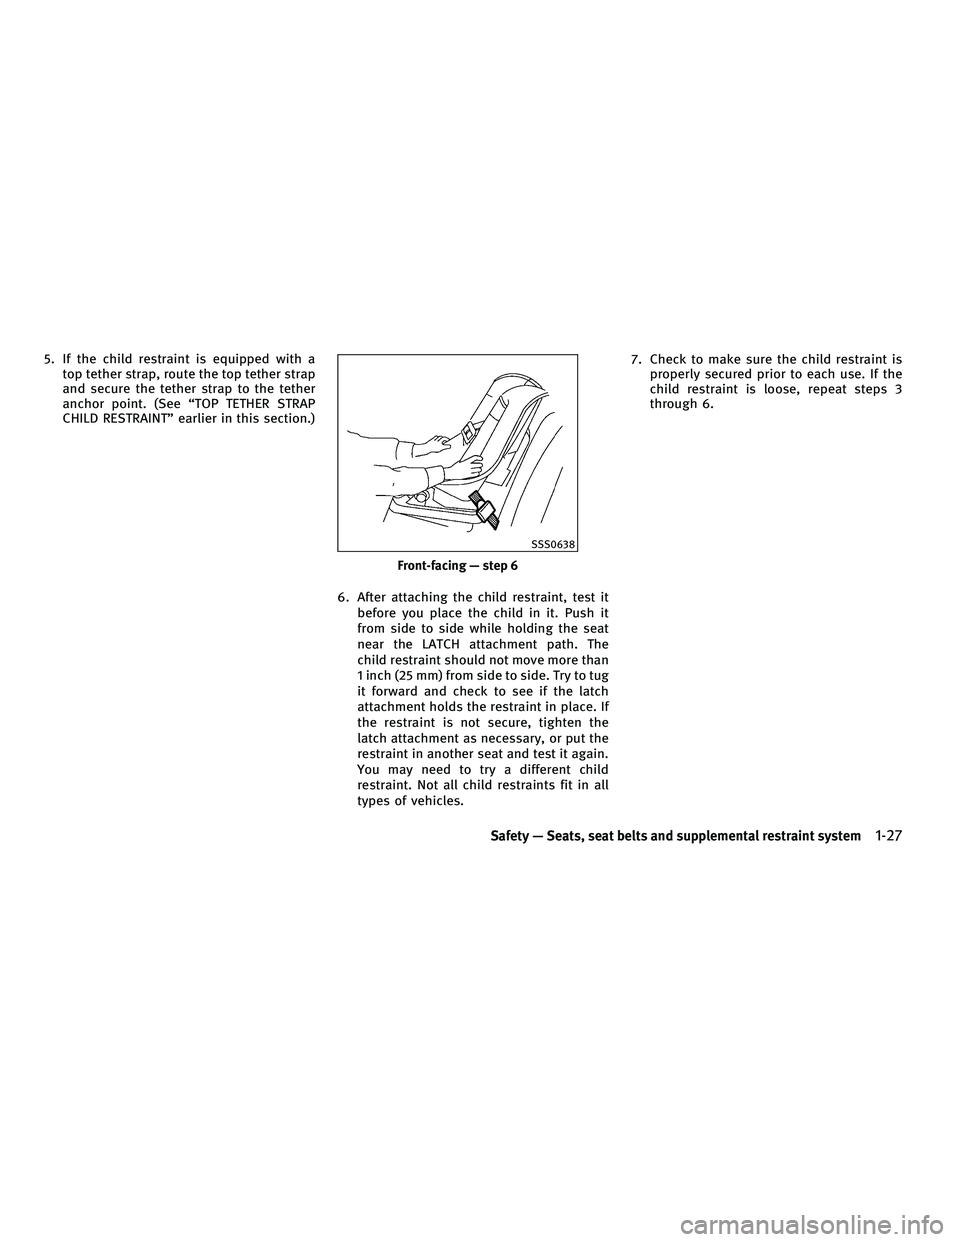 INFINITI G 2010 Service Manual 5. If the child restraint is equipped with atop tether strap, route the top tether strap
and secure the tether strap to the tether
anchor point. (See “TOP TETHER STRAP
CHILD RESTRAINT” earlier in 